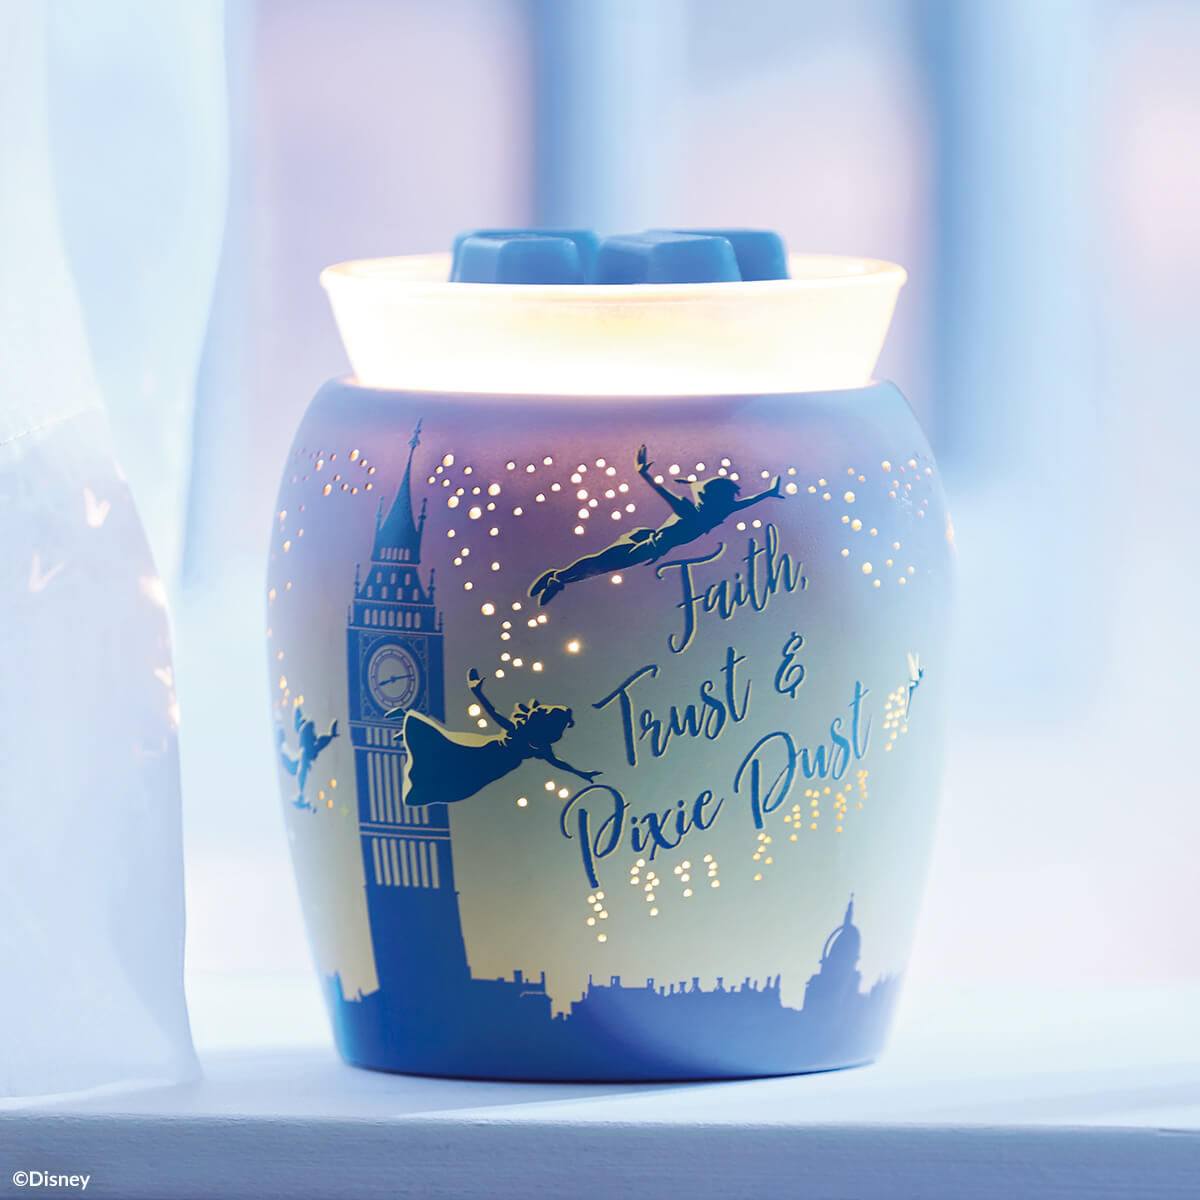 Scentsy Tinkerbell Make A Wish Warmer Disney Products by